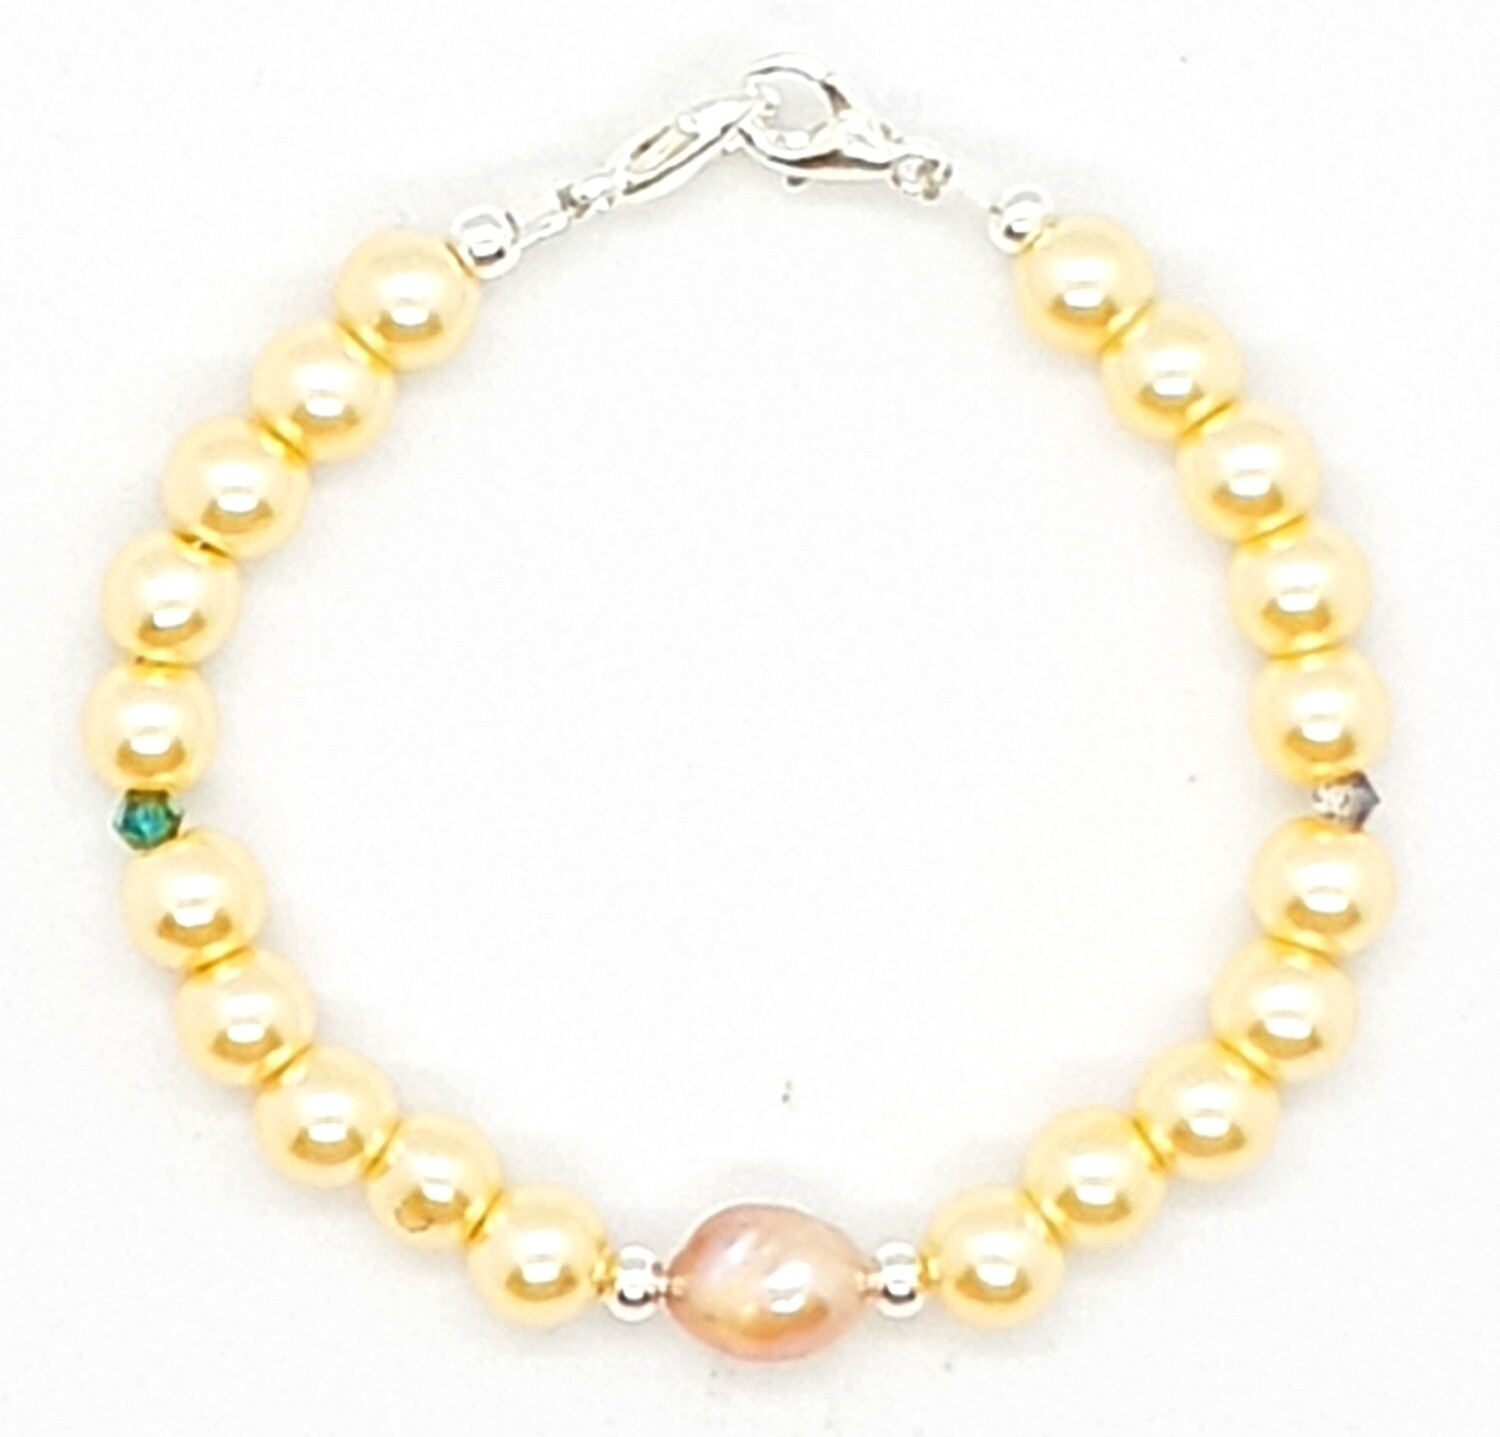 Bracelet & Face Cover Extender Dual Function (Marvelous - Freshwater Pearl Charm & Pearl Beads)